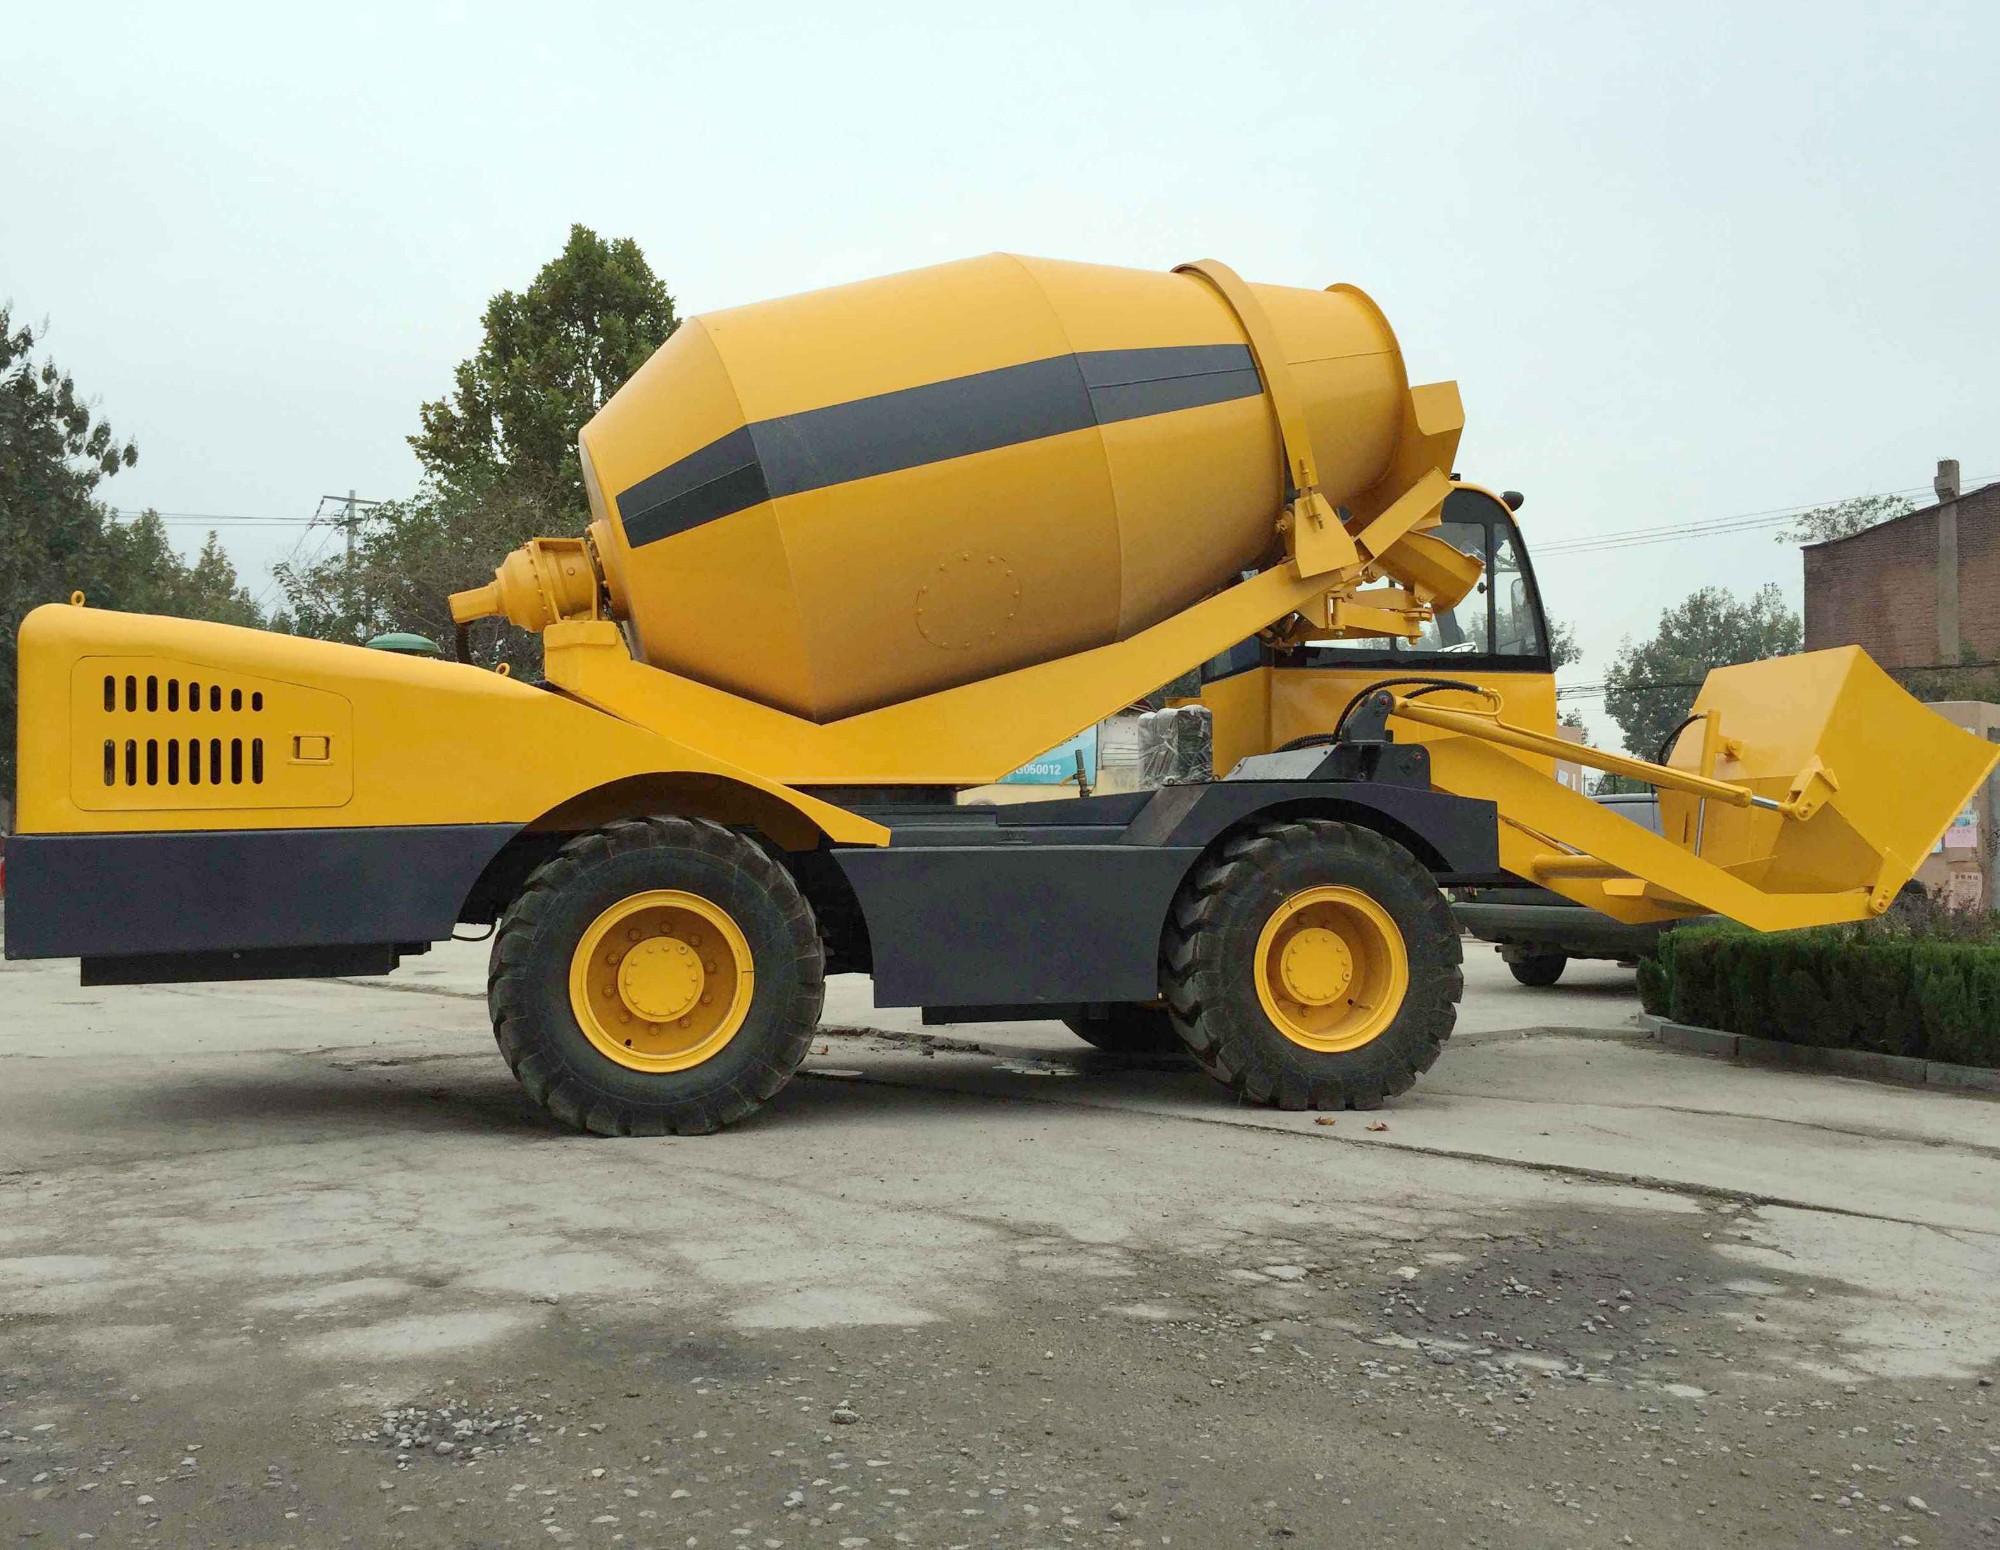 Sales HANK 3.5 Cubic Meters Self Propelled Hydraulic Mobile Self Loading Concrete Mixer Truck Price, Buy HANK 3.5 Cubic Meters Self Propelled Hydraulic Mobile Self Loading Concrete Mixer Truck Price, HANK 3.5 Cubic Meters Self Propelled Hydraulic Mobile Self Loading Concrete Mixer Truck Price Factory, HANK 3.5 Cubic Meters Self Propelled Hydraulic Mobile Self Loading Concrete Mixer Truck Price Brands